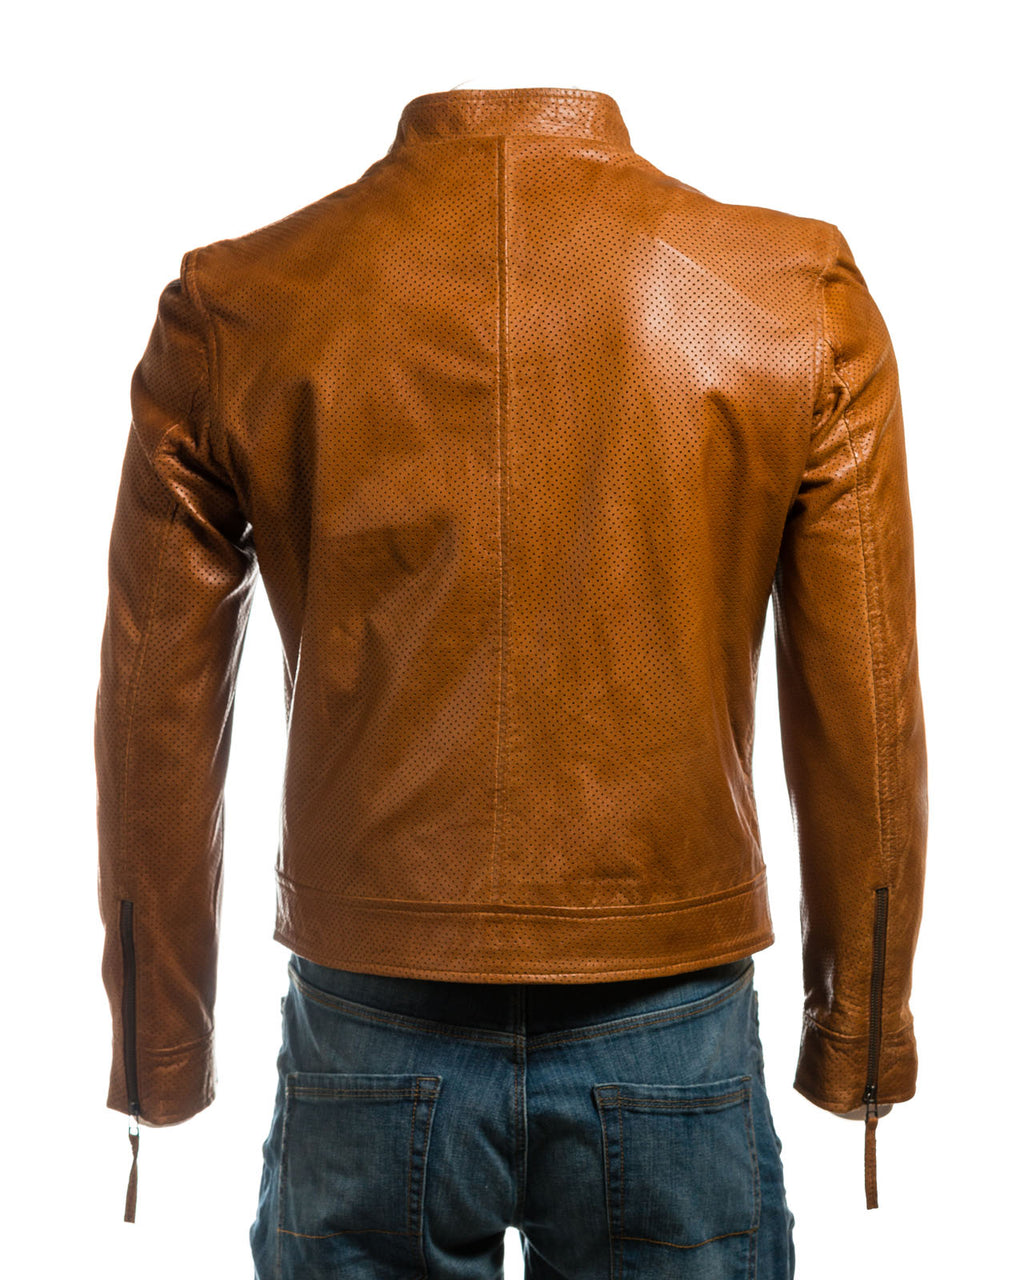 Men's Micro-Perforated Short Zipped Leather Jacket: Sabino